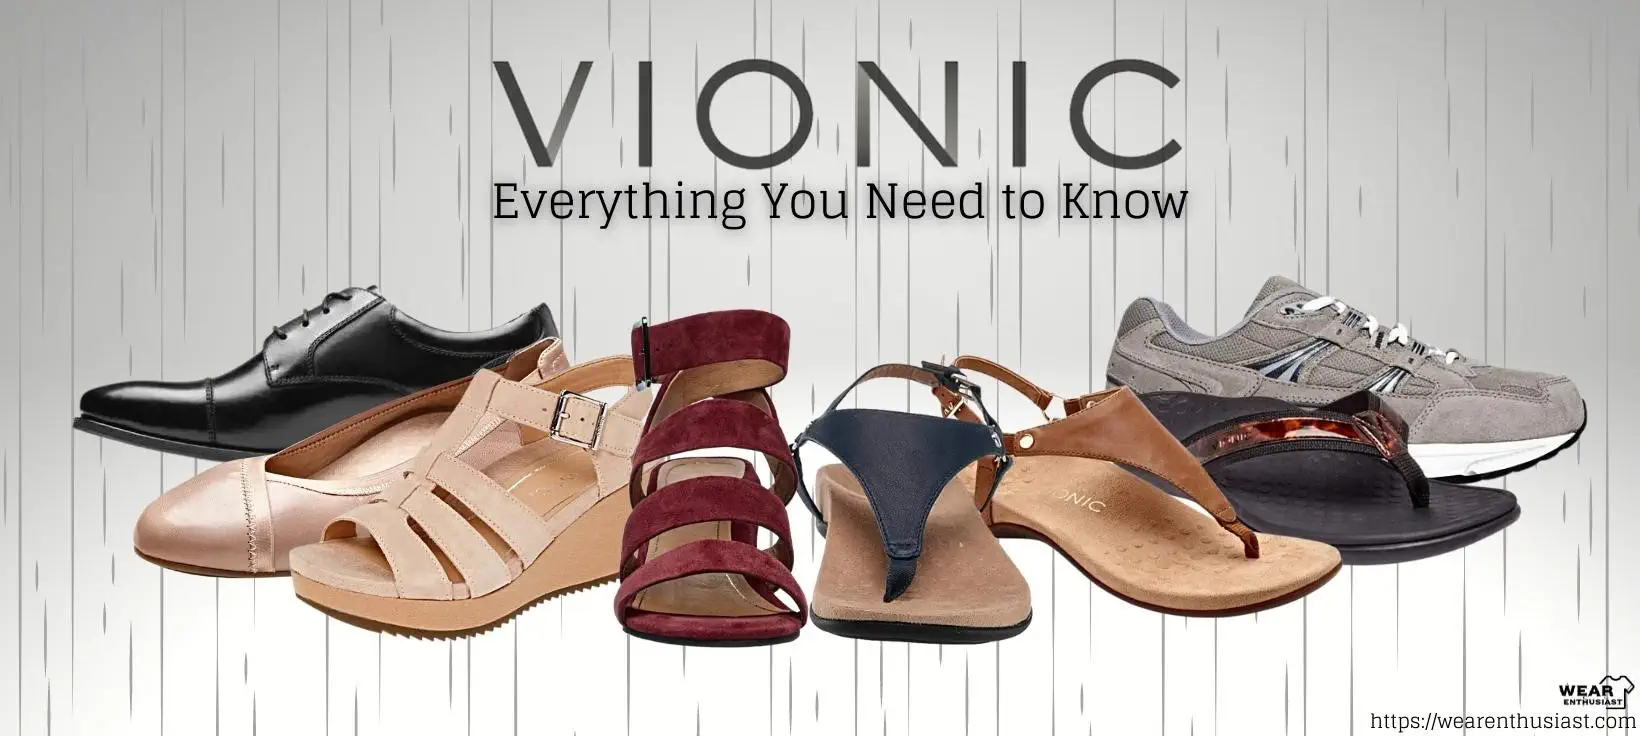 Vionic Everything You Need to Know